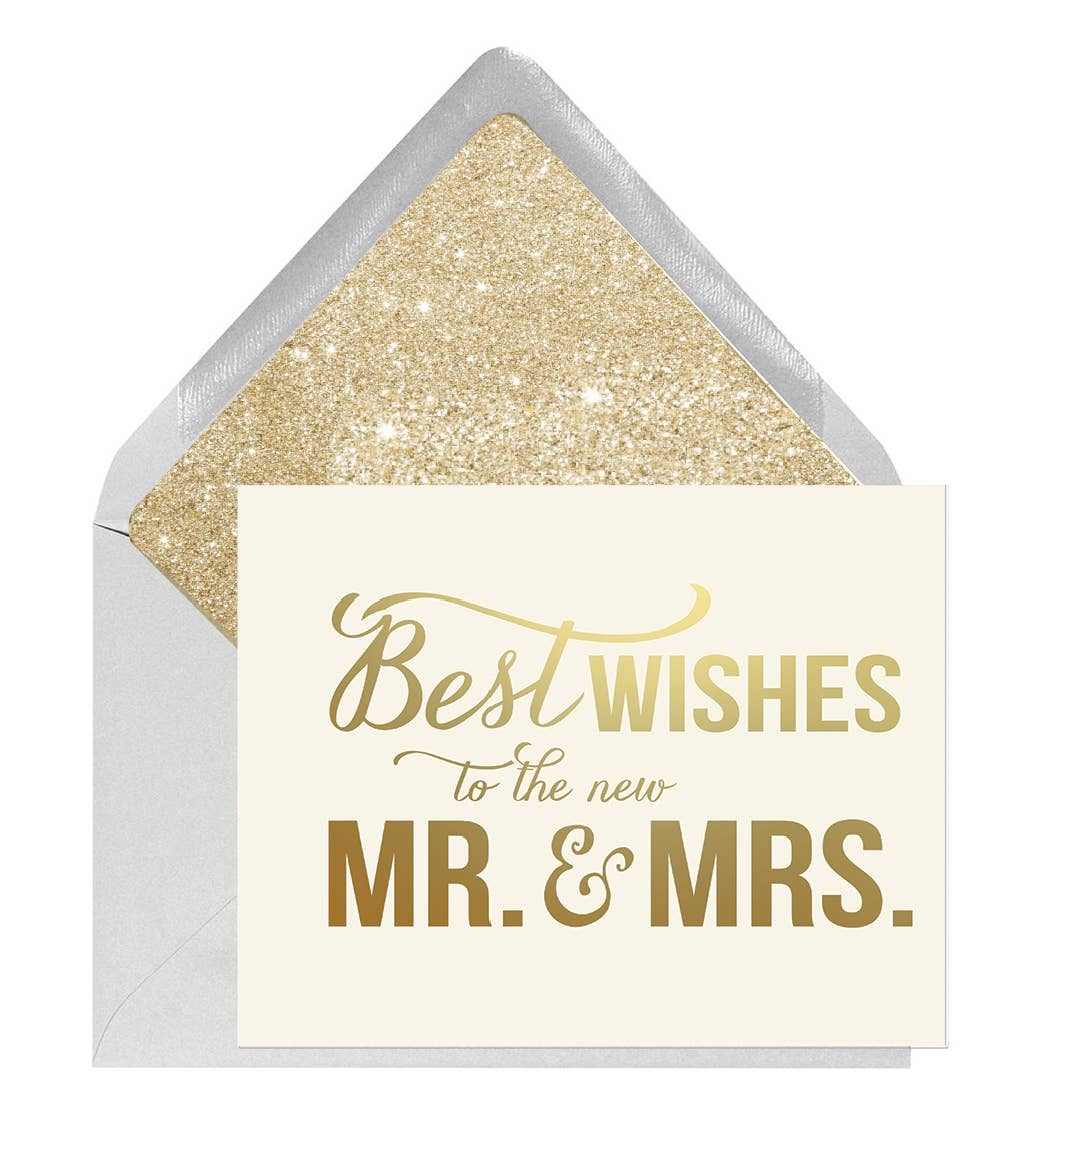 Gold foiled Best Wishes to the new Mr. and Mrs. Wedding Card and coordinating envelope by Ginger P. Designs.